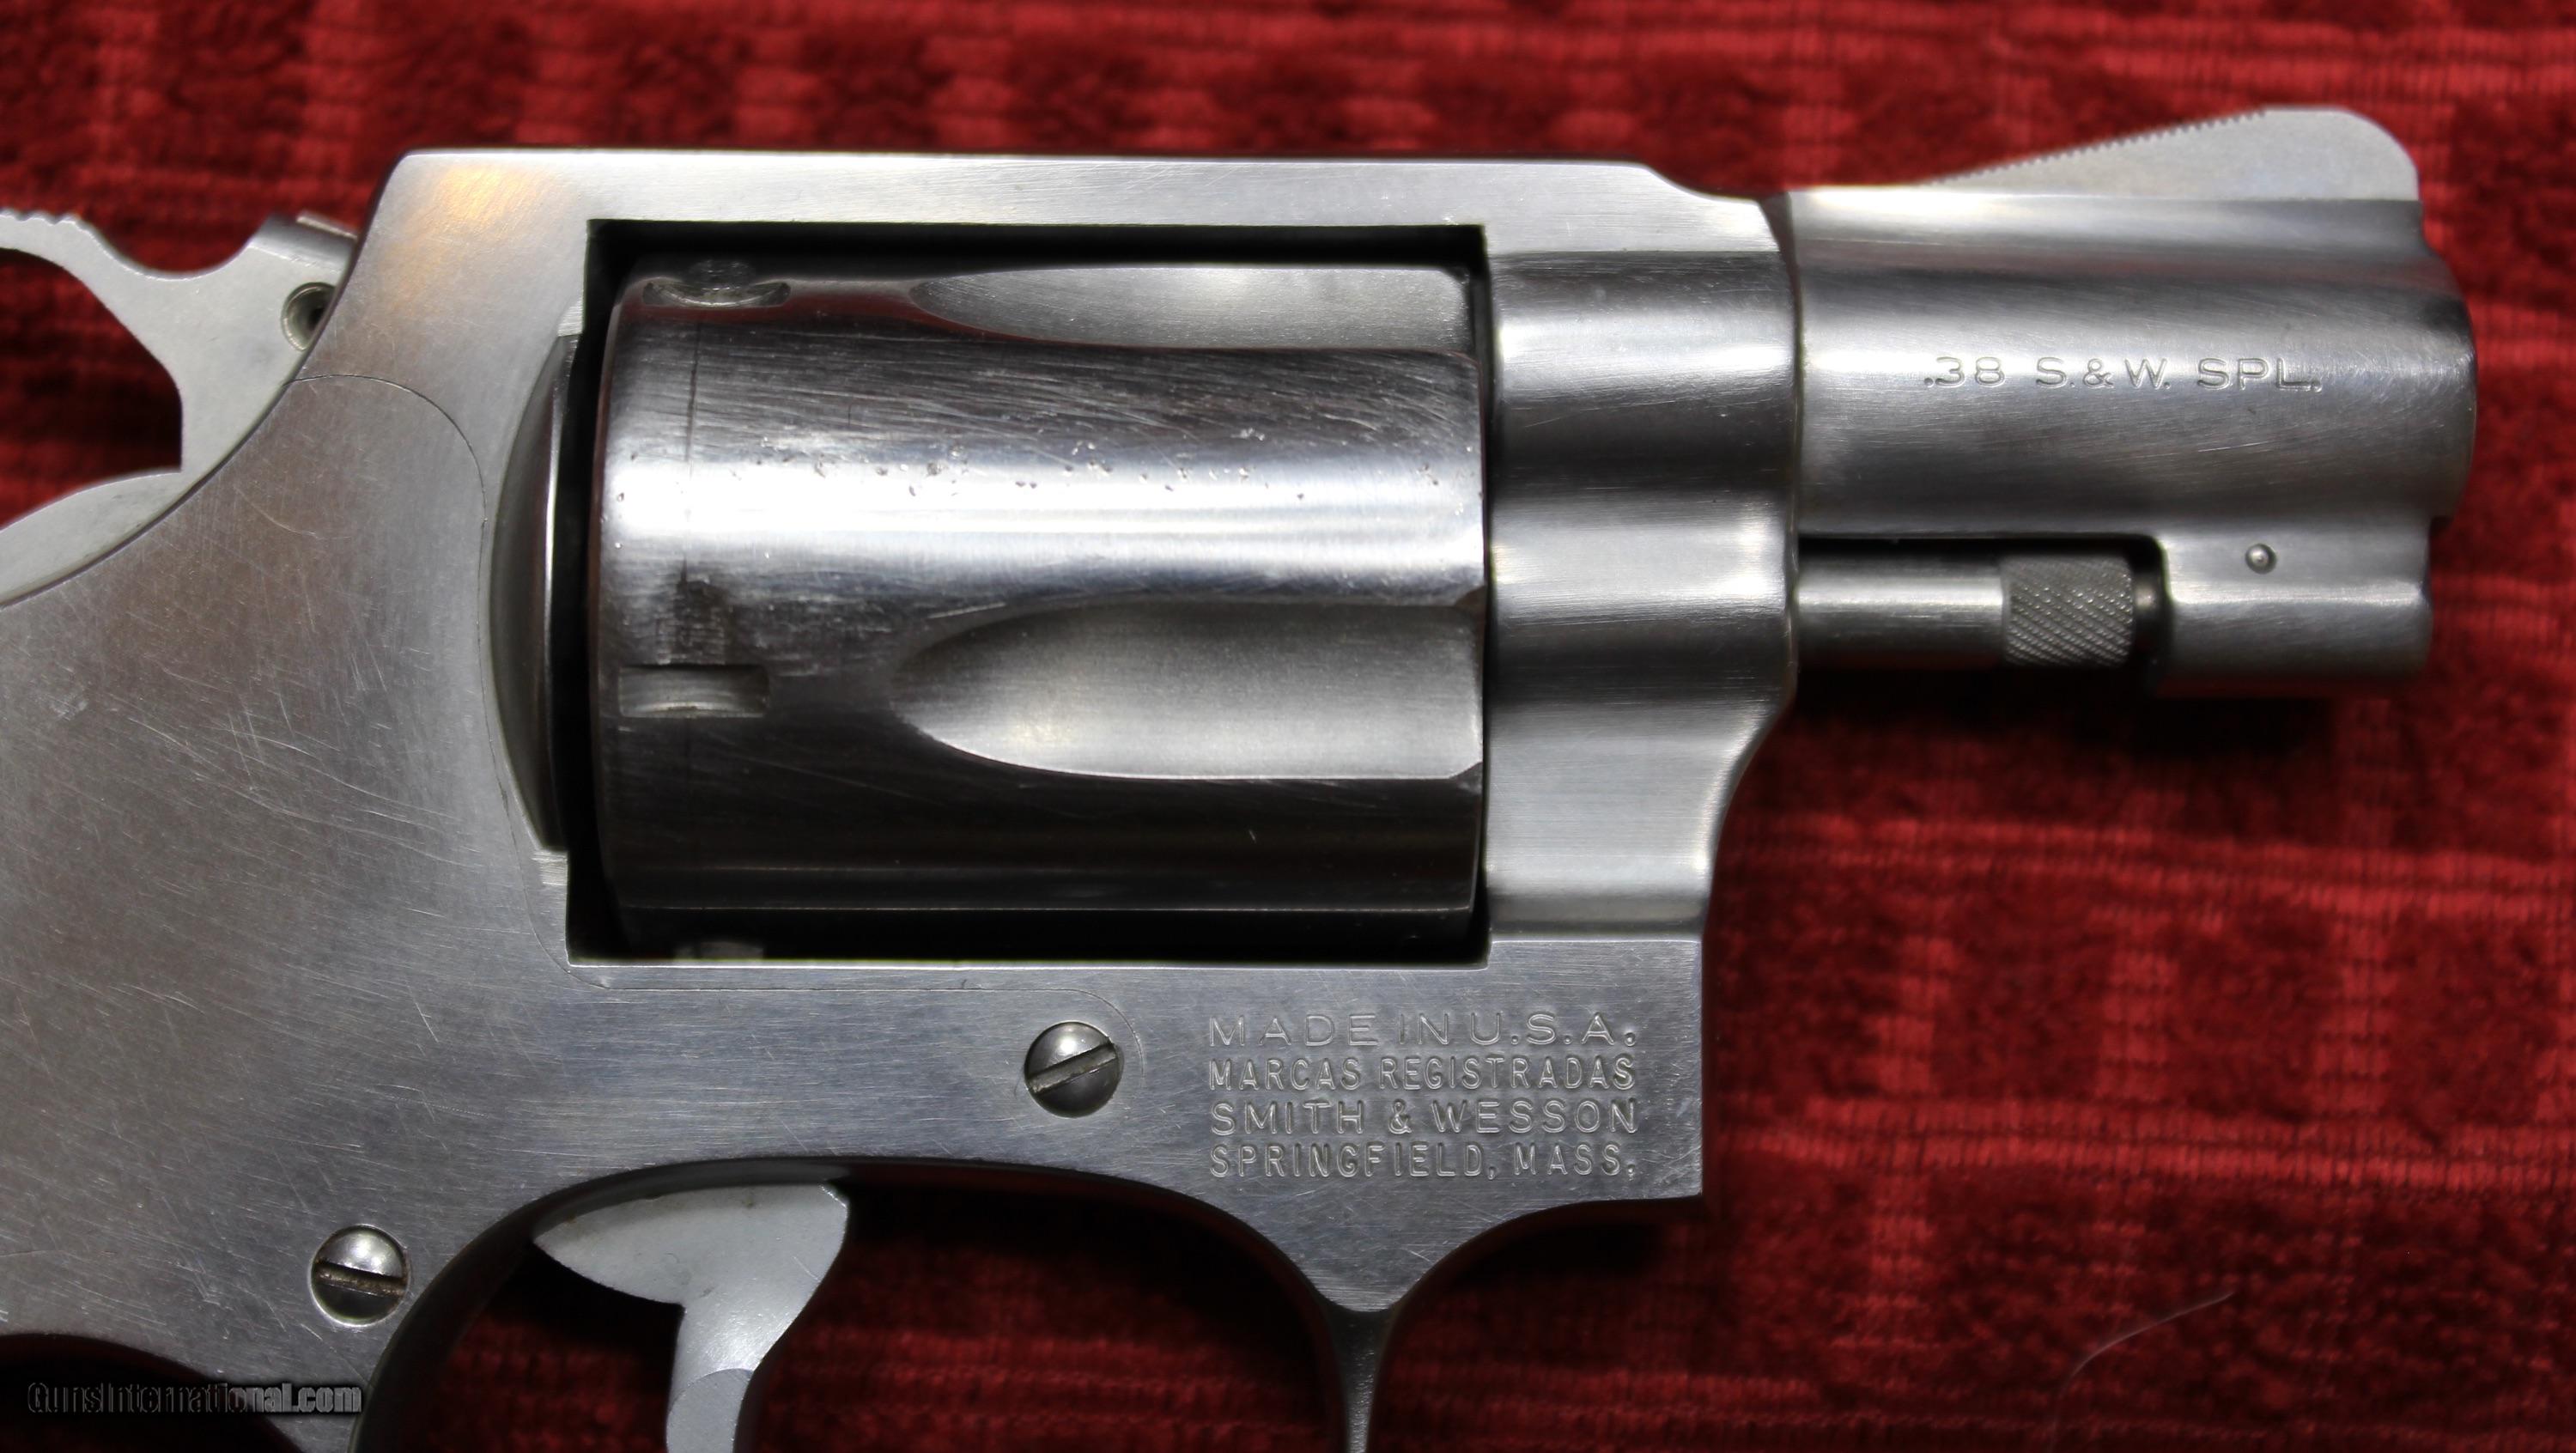 Smith and wesson model 60 disassembly of browning buckmark